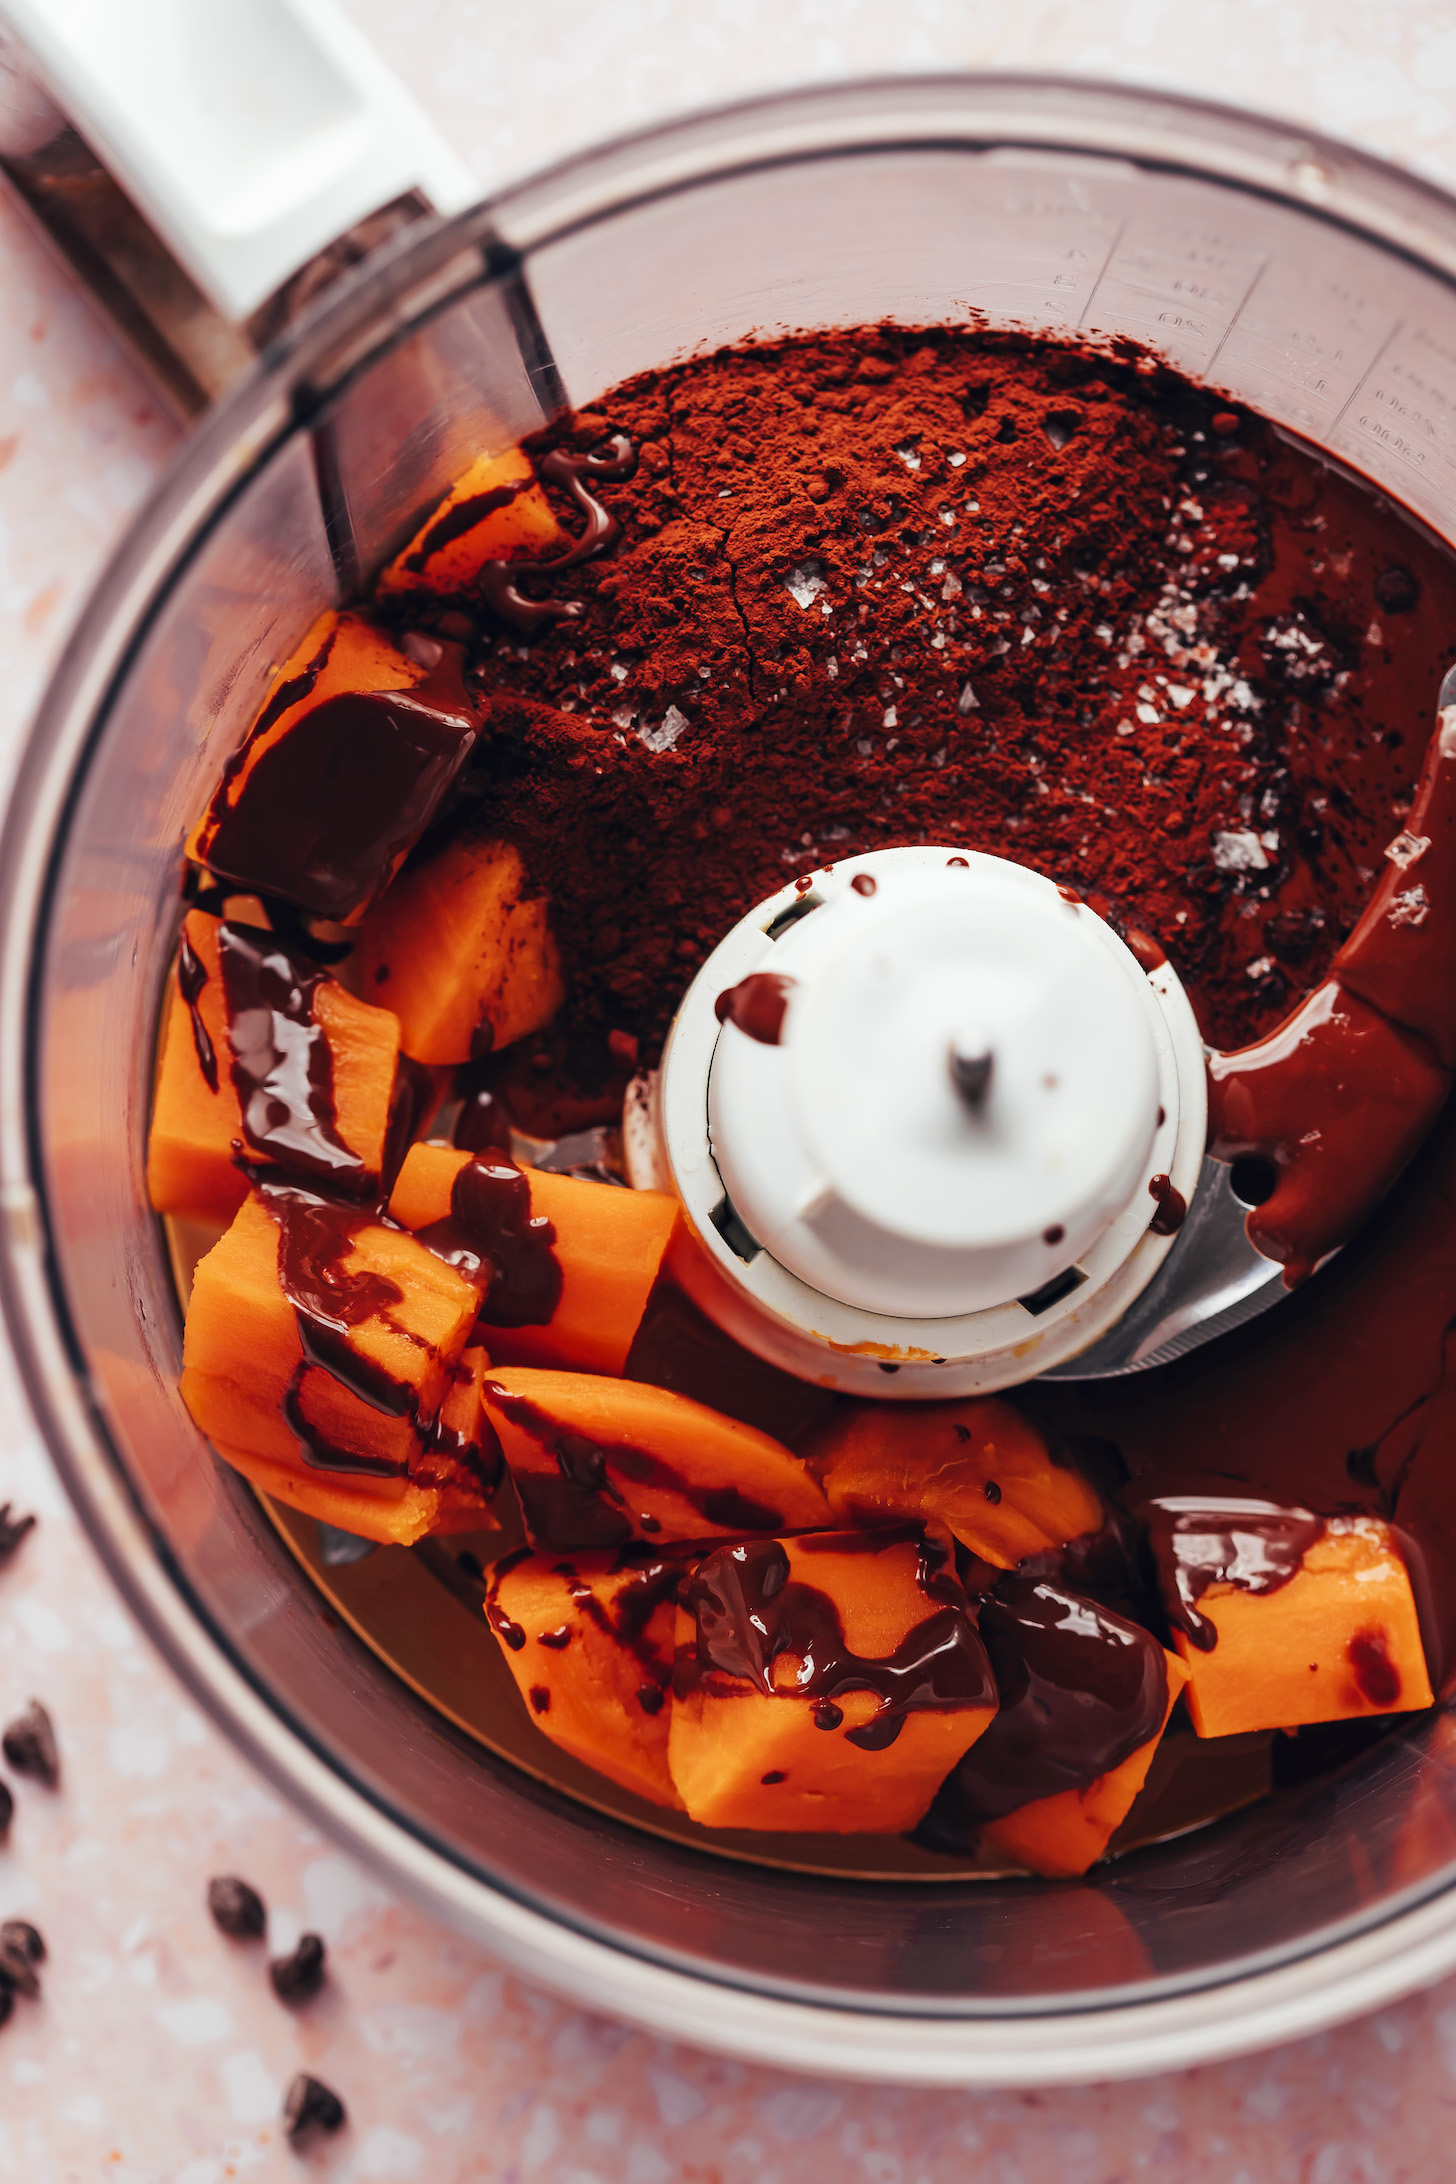 Food processor with steamed sweet potato, melted dark chocolate, salt, and cocoa powder